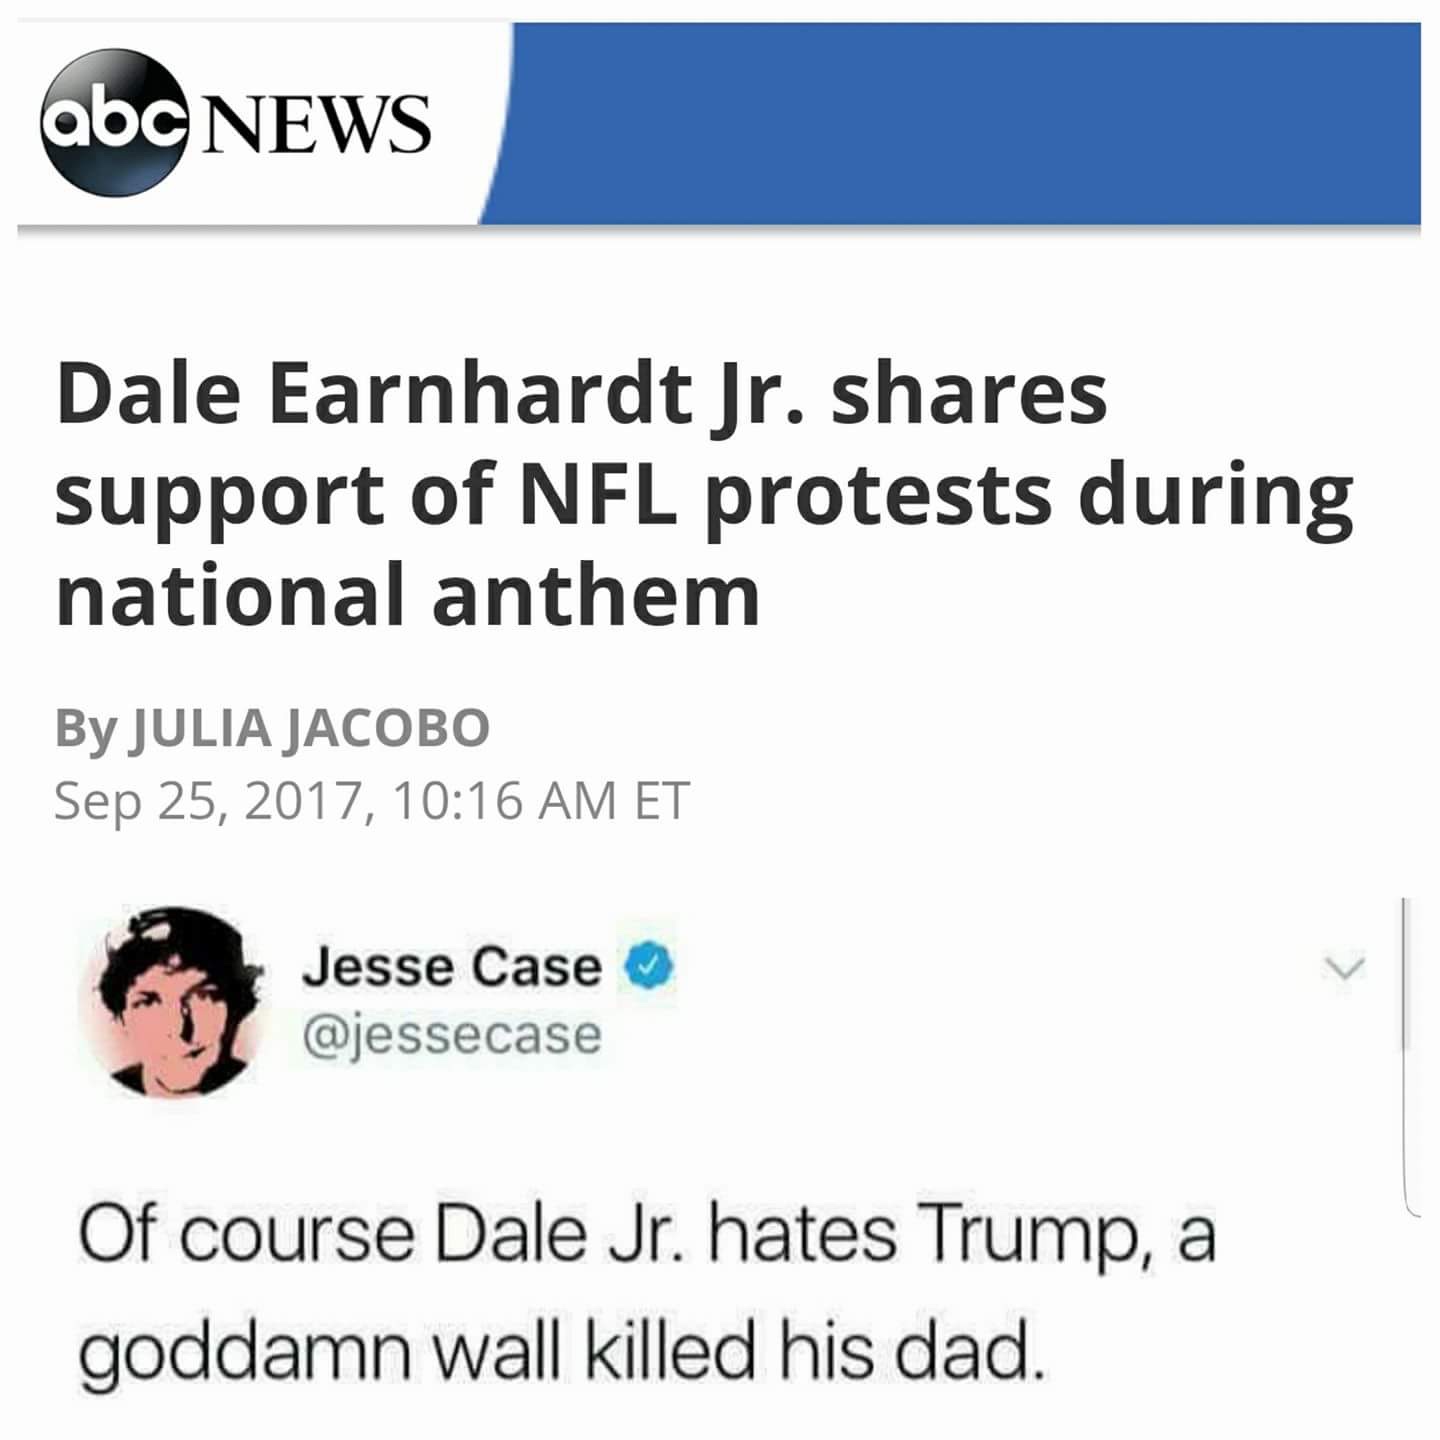 memes - abc news - abc News Dale Earnhardt Jr. support of Nfl protests during national anthem By Julia Jacobo , Et Jesse Case Of course Dale Jr. hates Trump, a goddamn wall killed his dad.